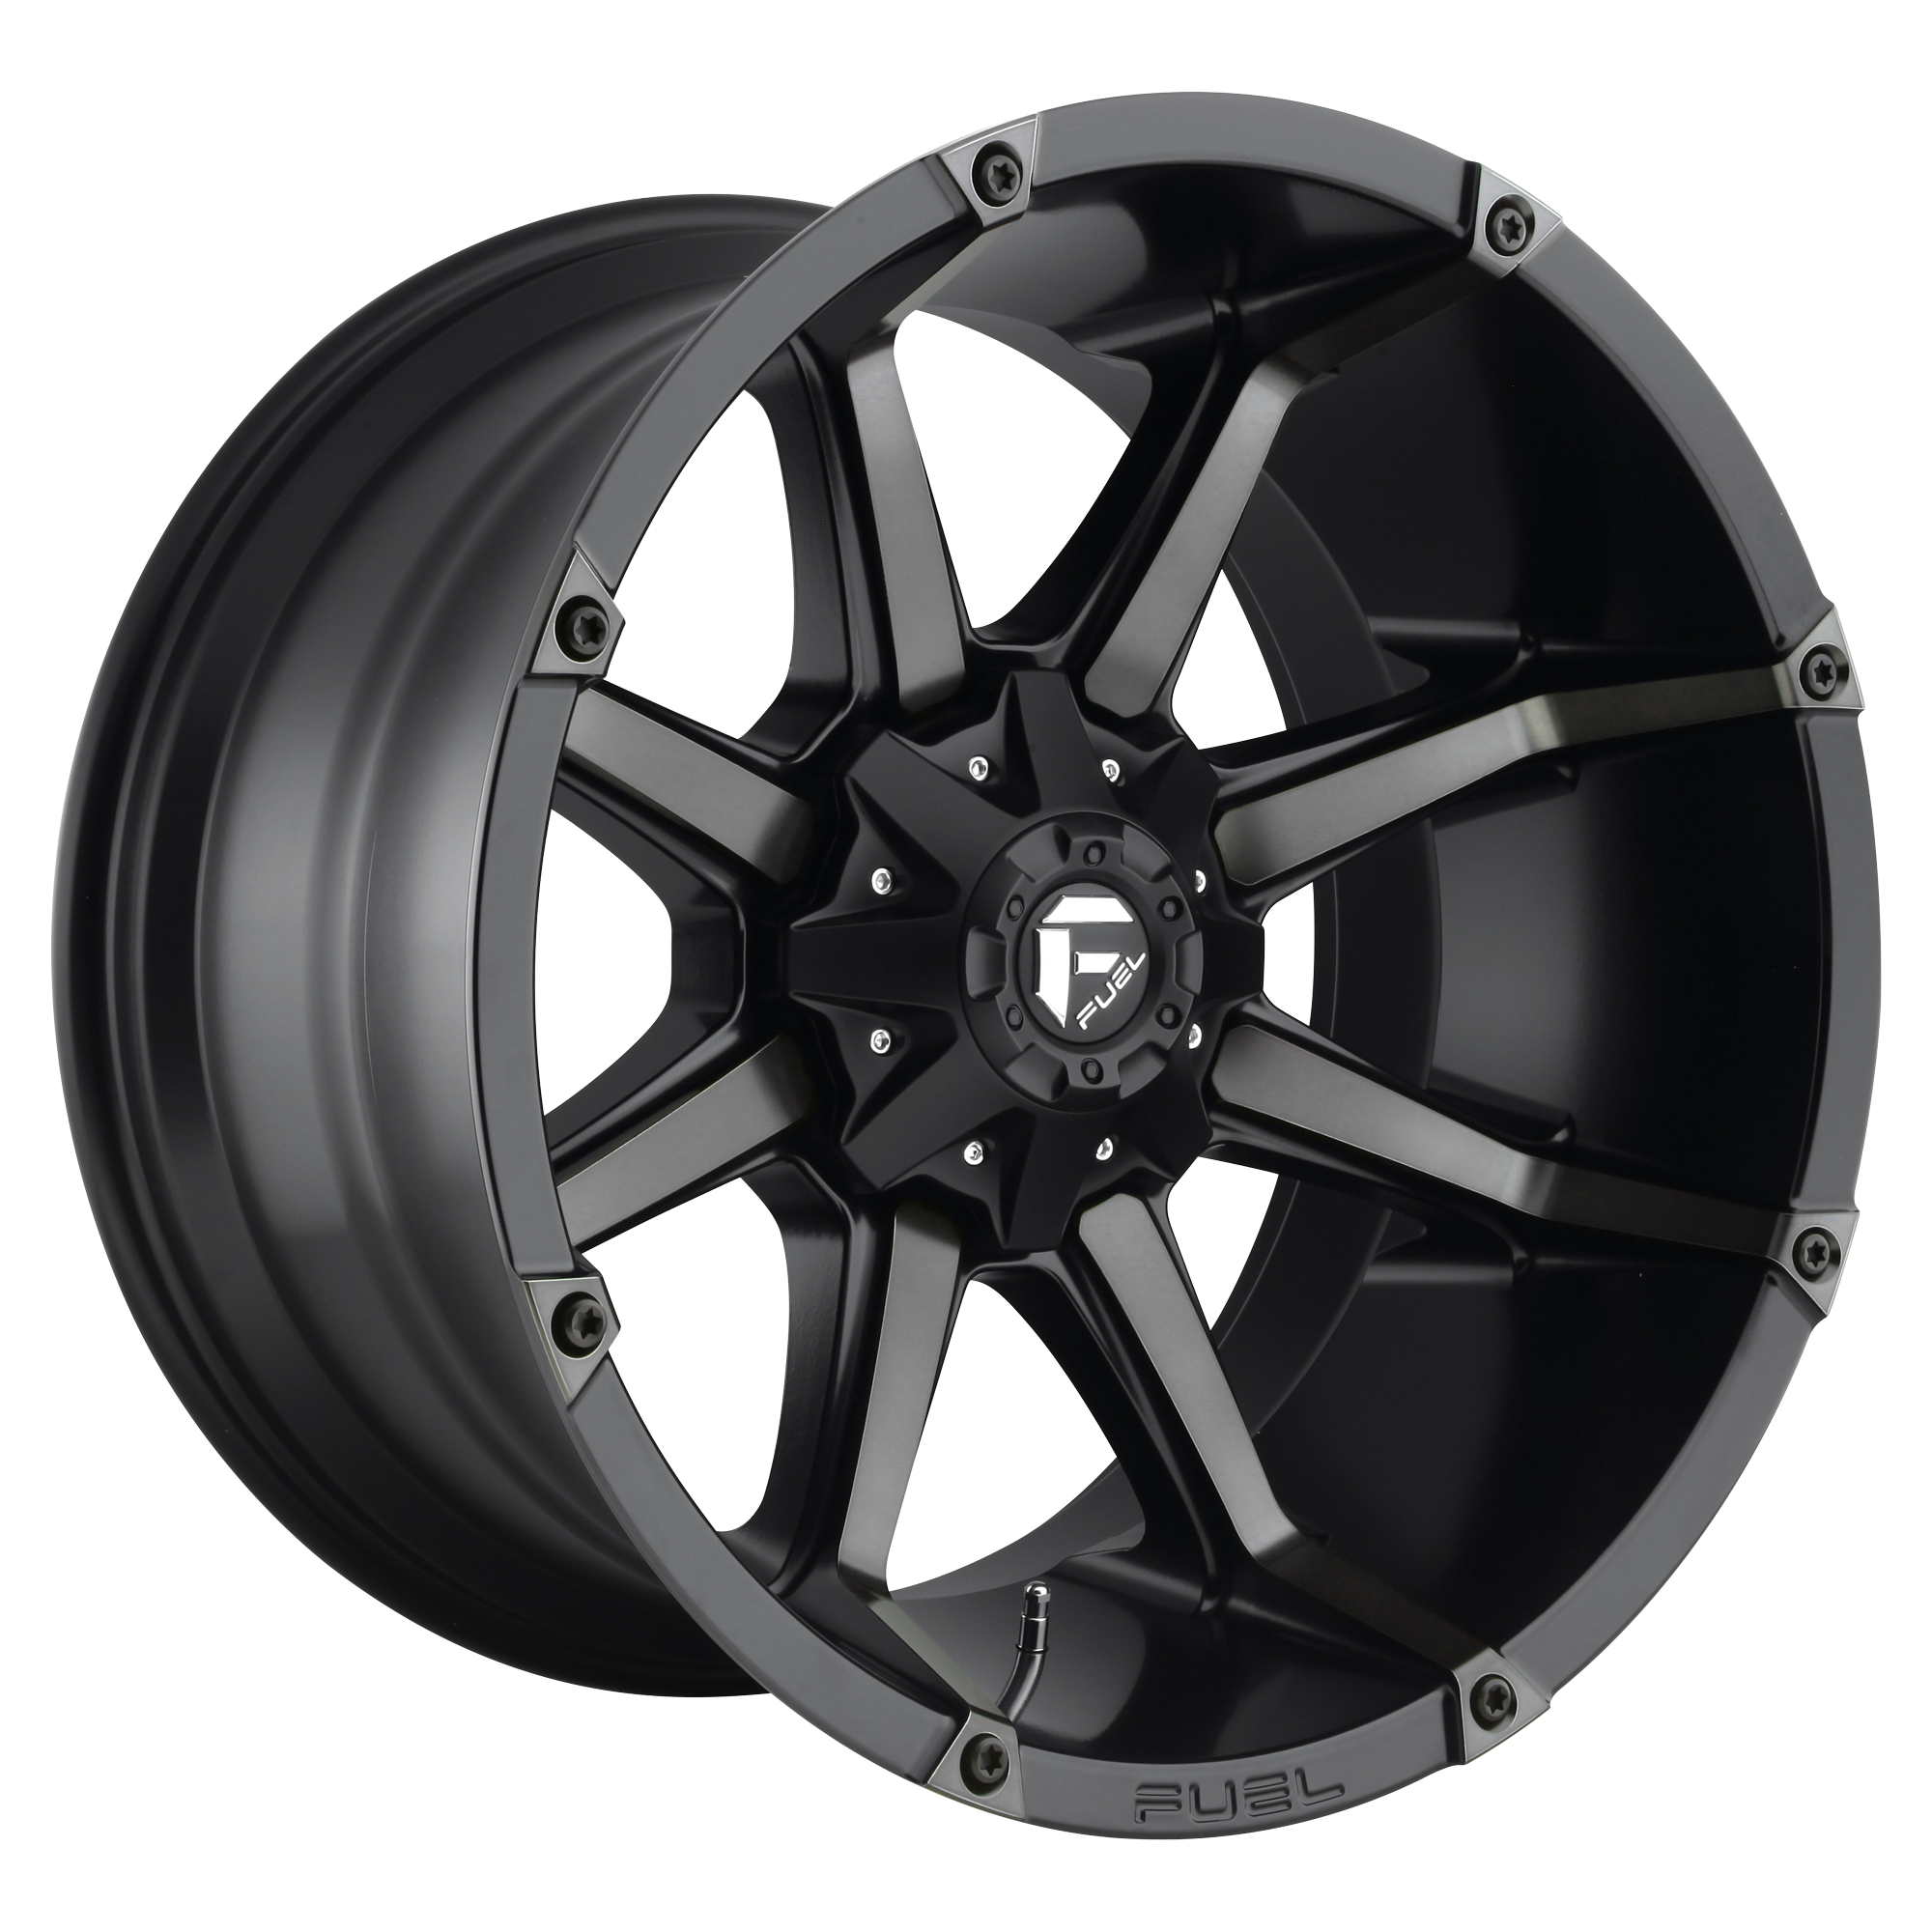 COUPLER 20x10 5x139.70/5x150.00 MATTE BLACK DOUBLE DARK TINT (-12 mm) - Tires and Engine Performance